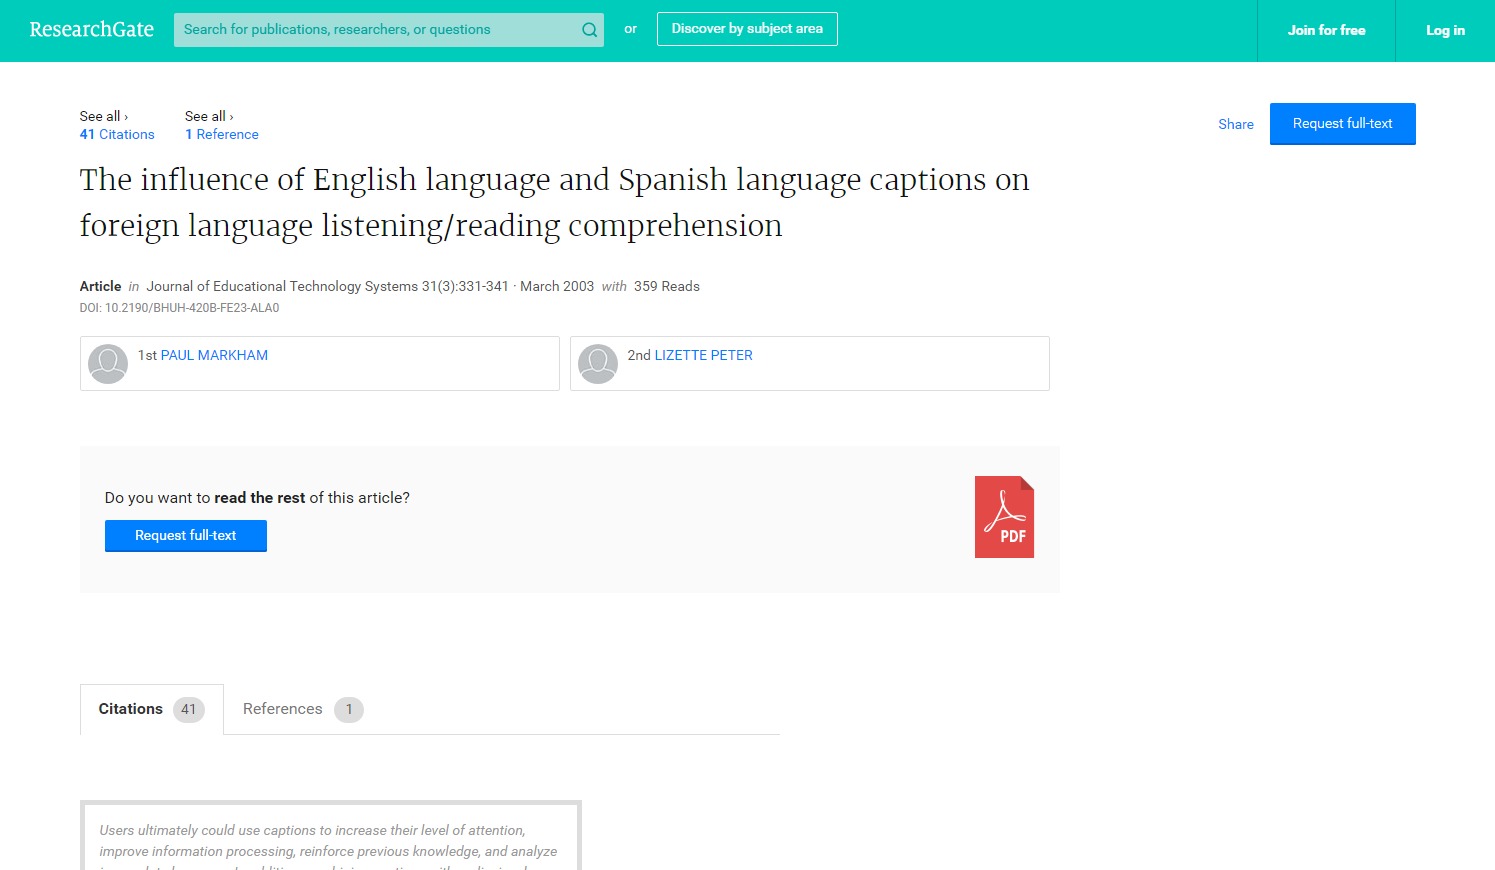 The Influence of English Language and Spanish Language Captions on Foreign Language Listening/Reading Comprehension